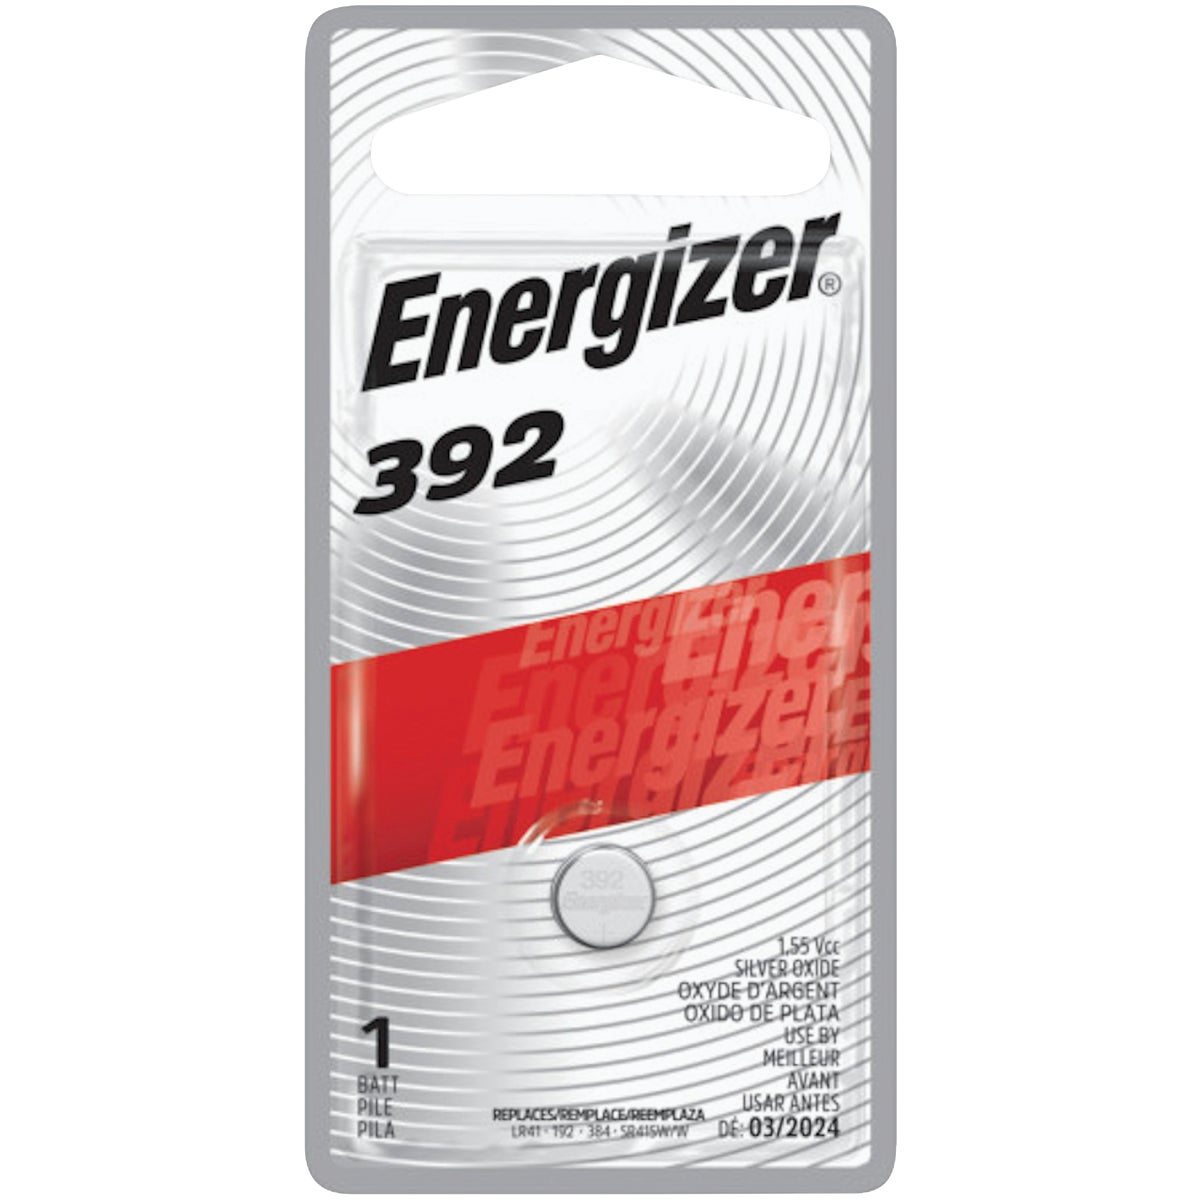 Item 817805, Energizer 392 silver oxide button cell battery with durable, reliable power